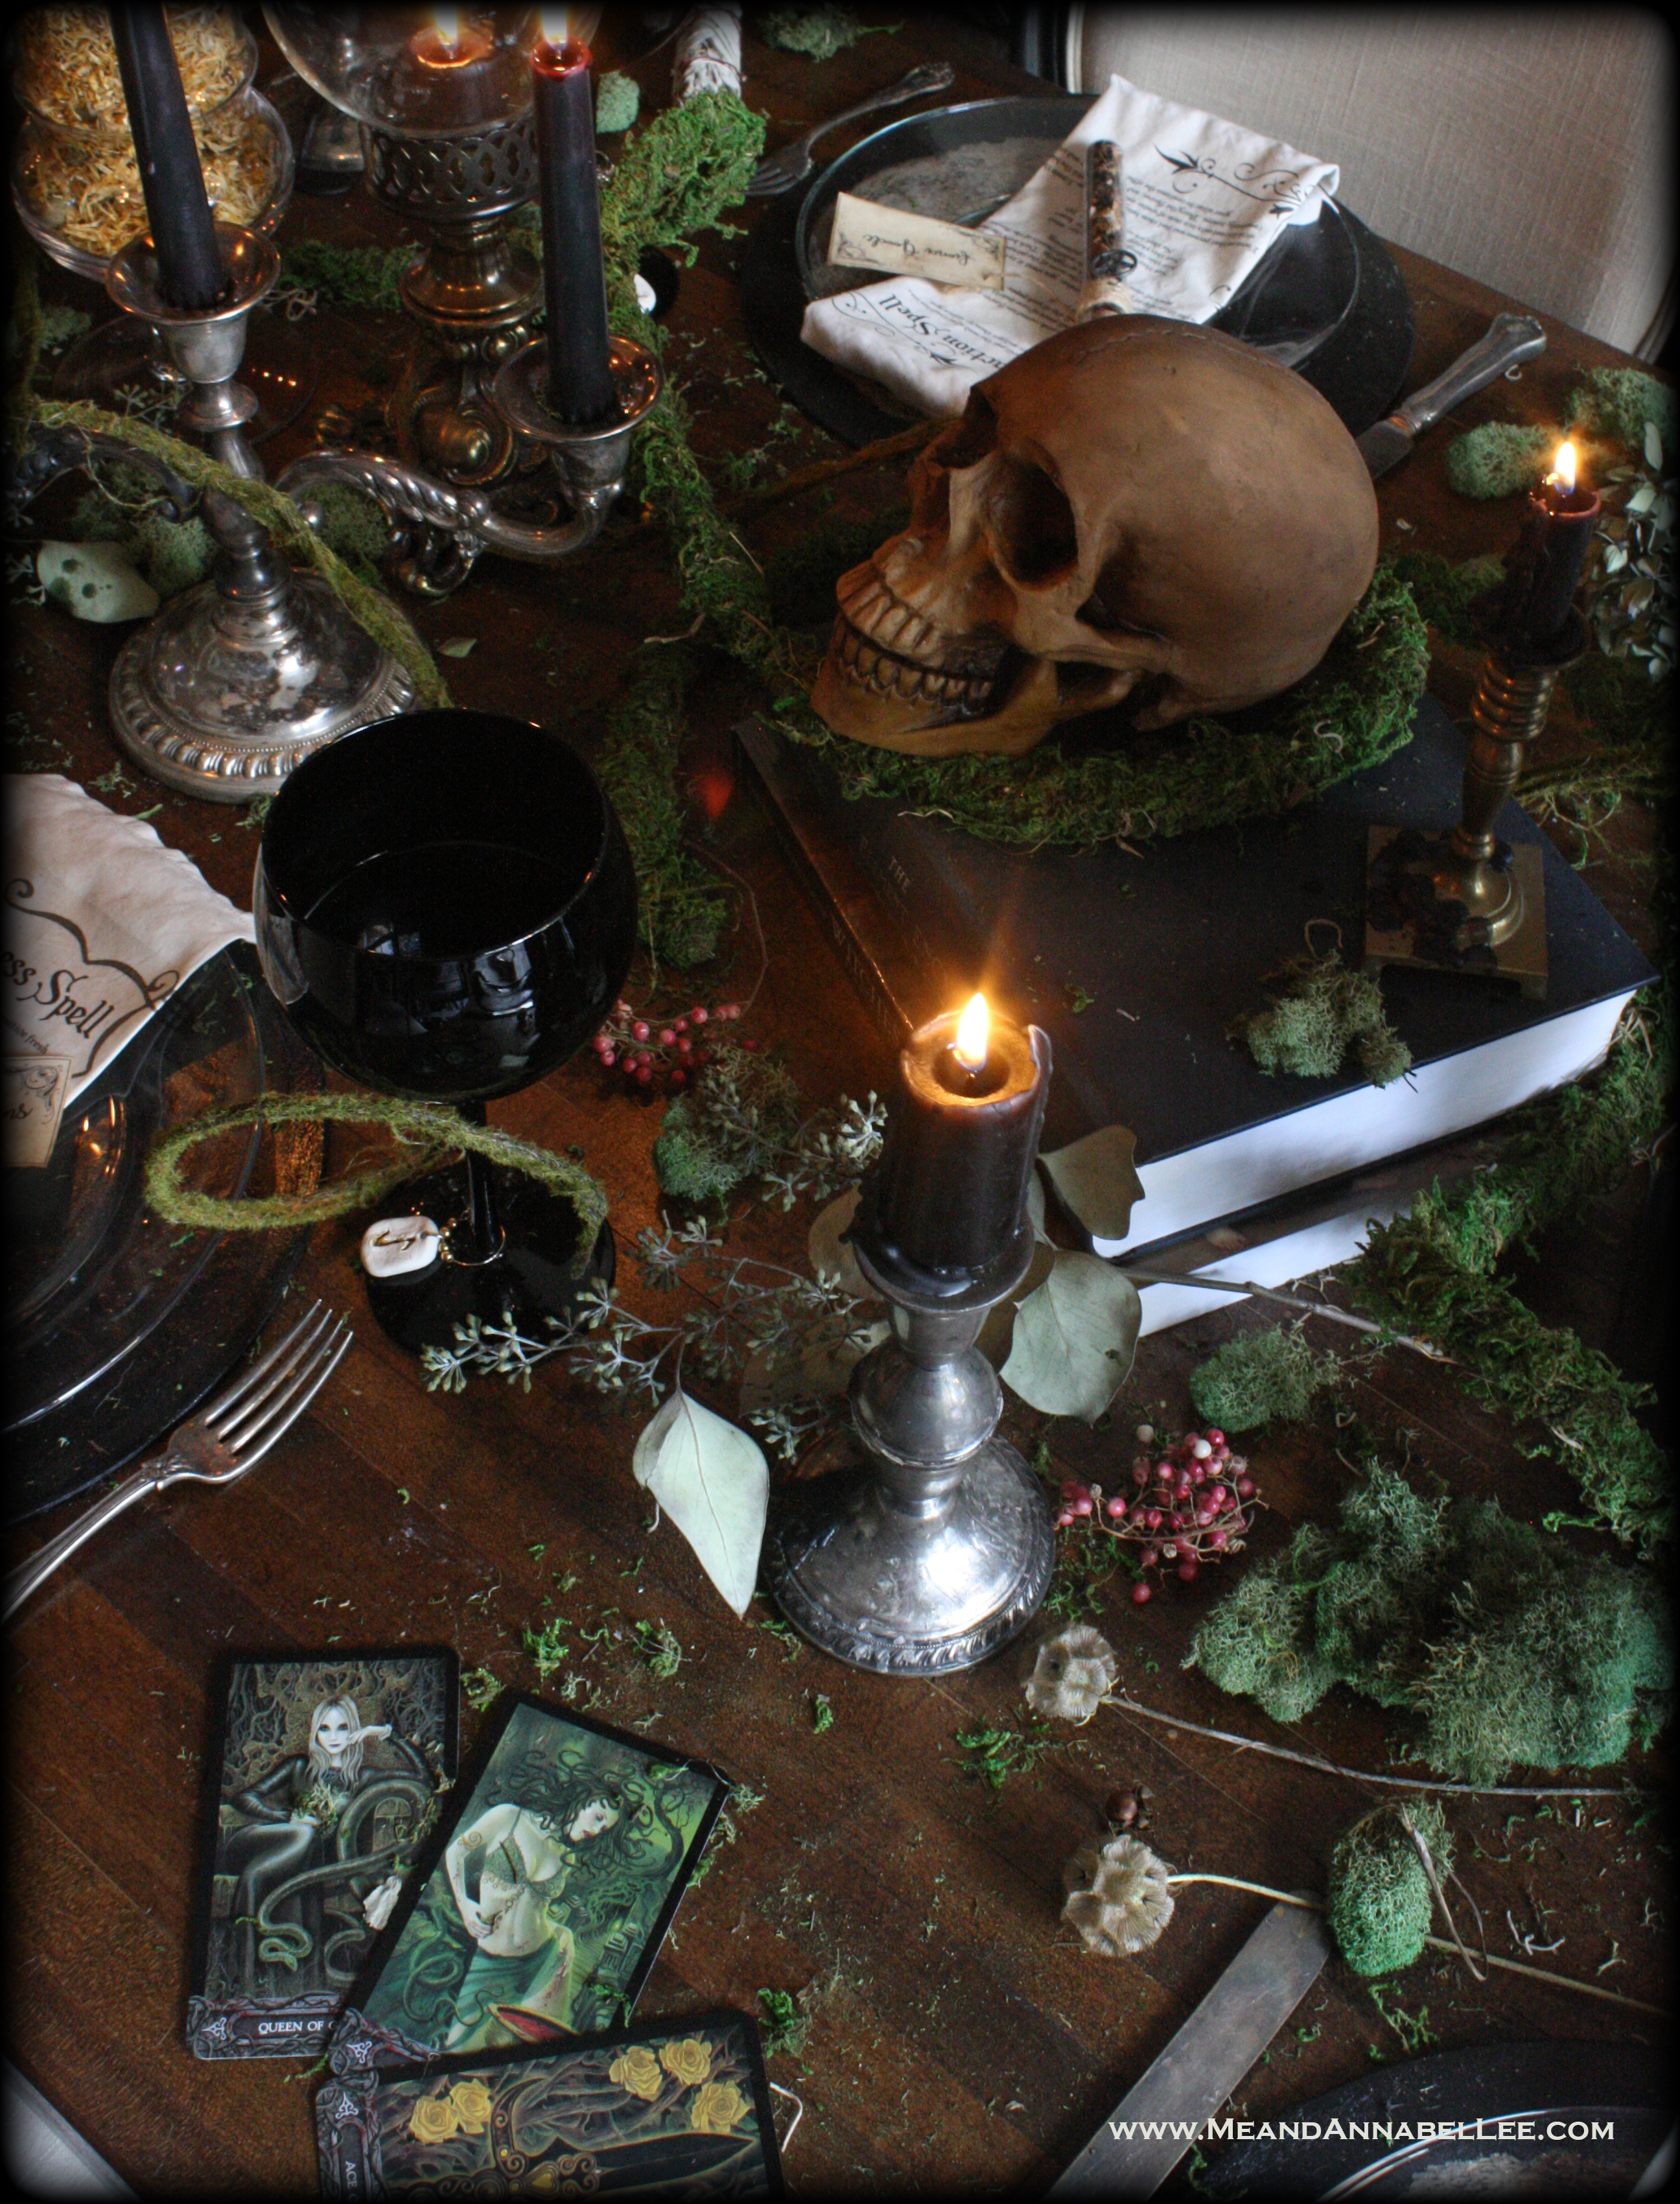 Witches Dinner Party | Tarot Cards | Fortune Telling | Skull Centerpiece | Enchanted Forest Table Décor | www.MeandAnnabelLee.com